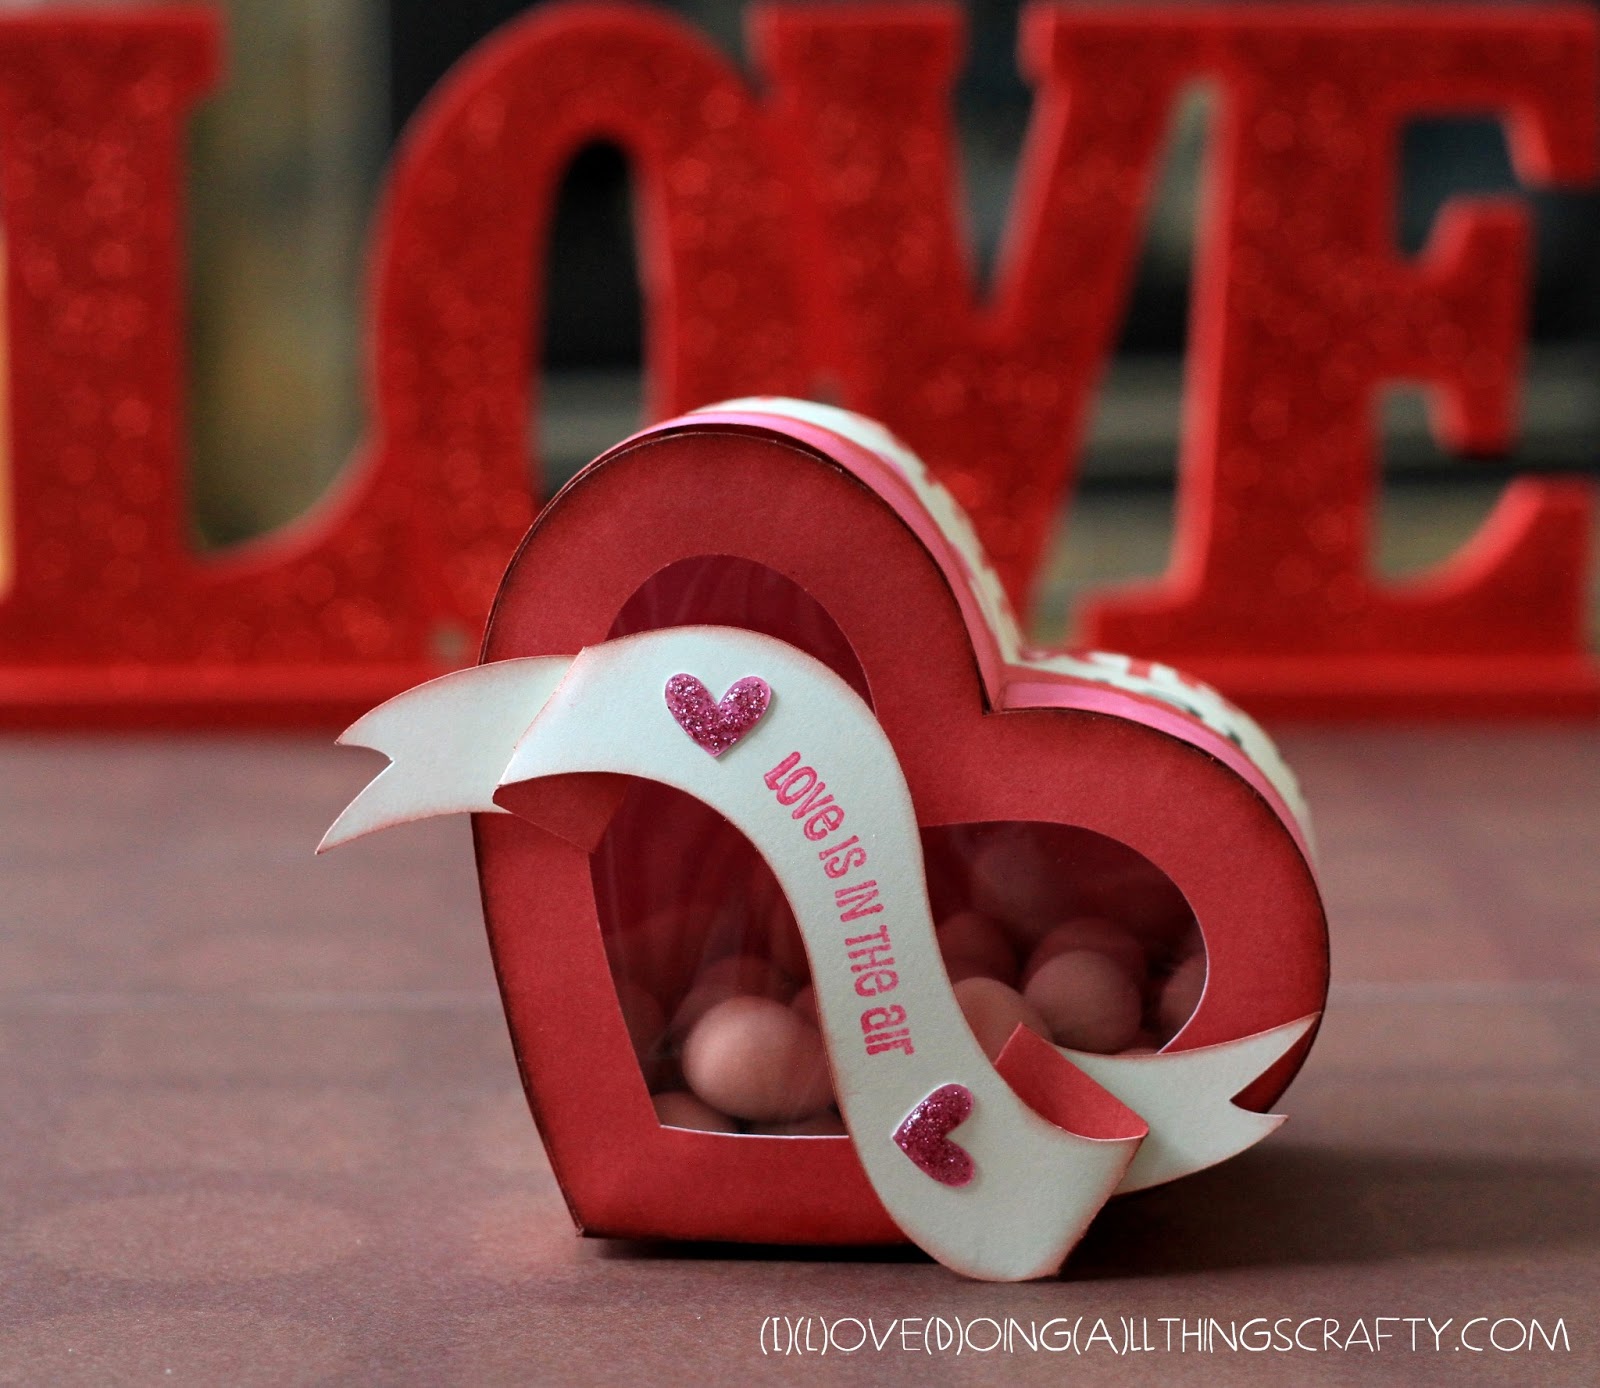 Download I Love Doing All Things Crafty: For my Valentine - Heart ...